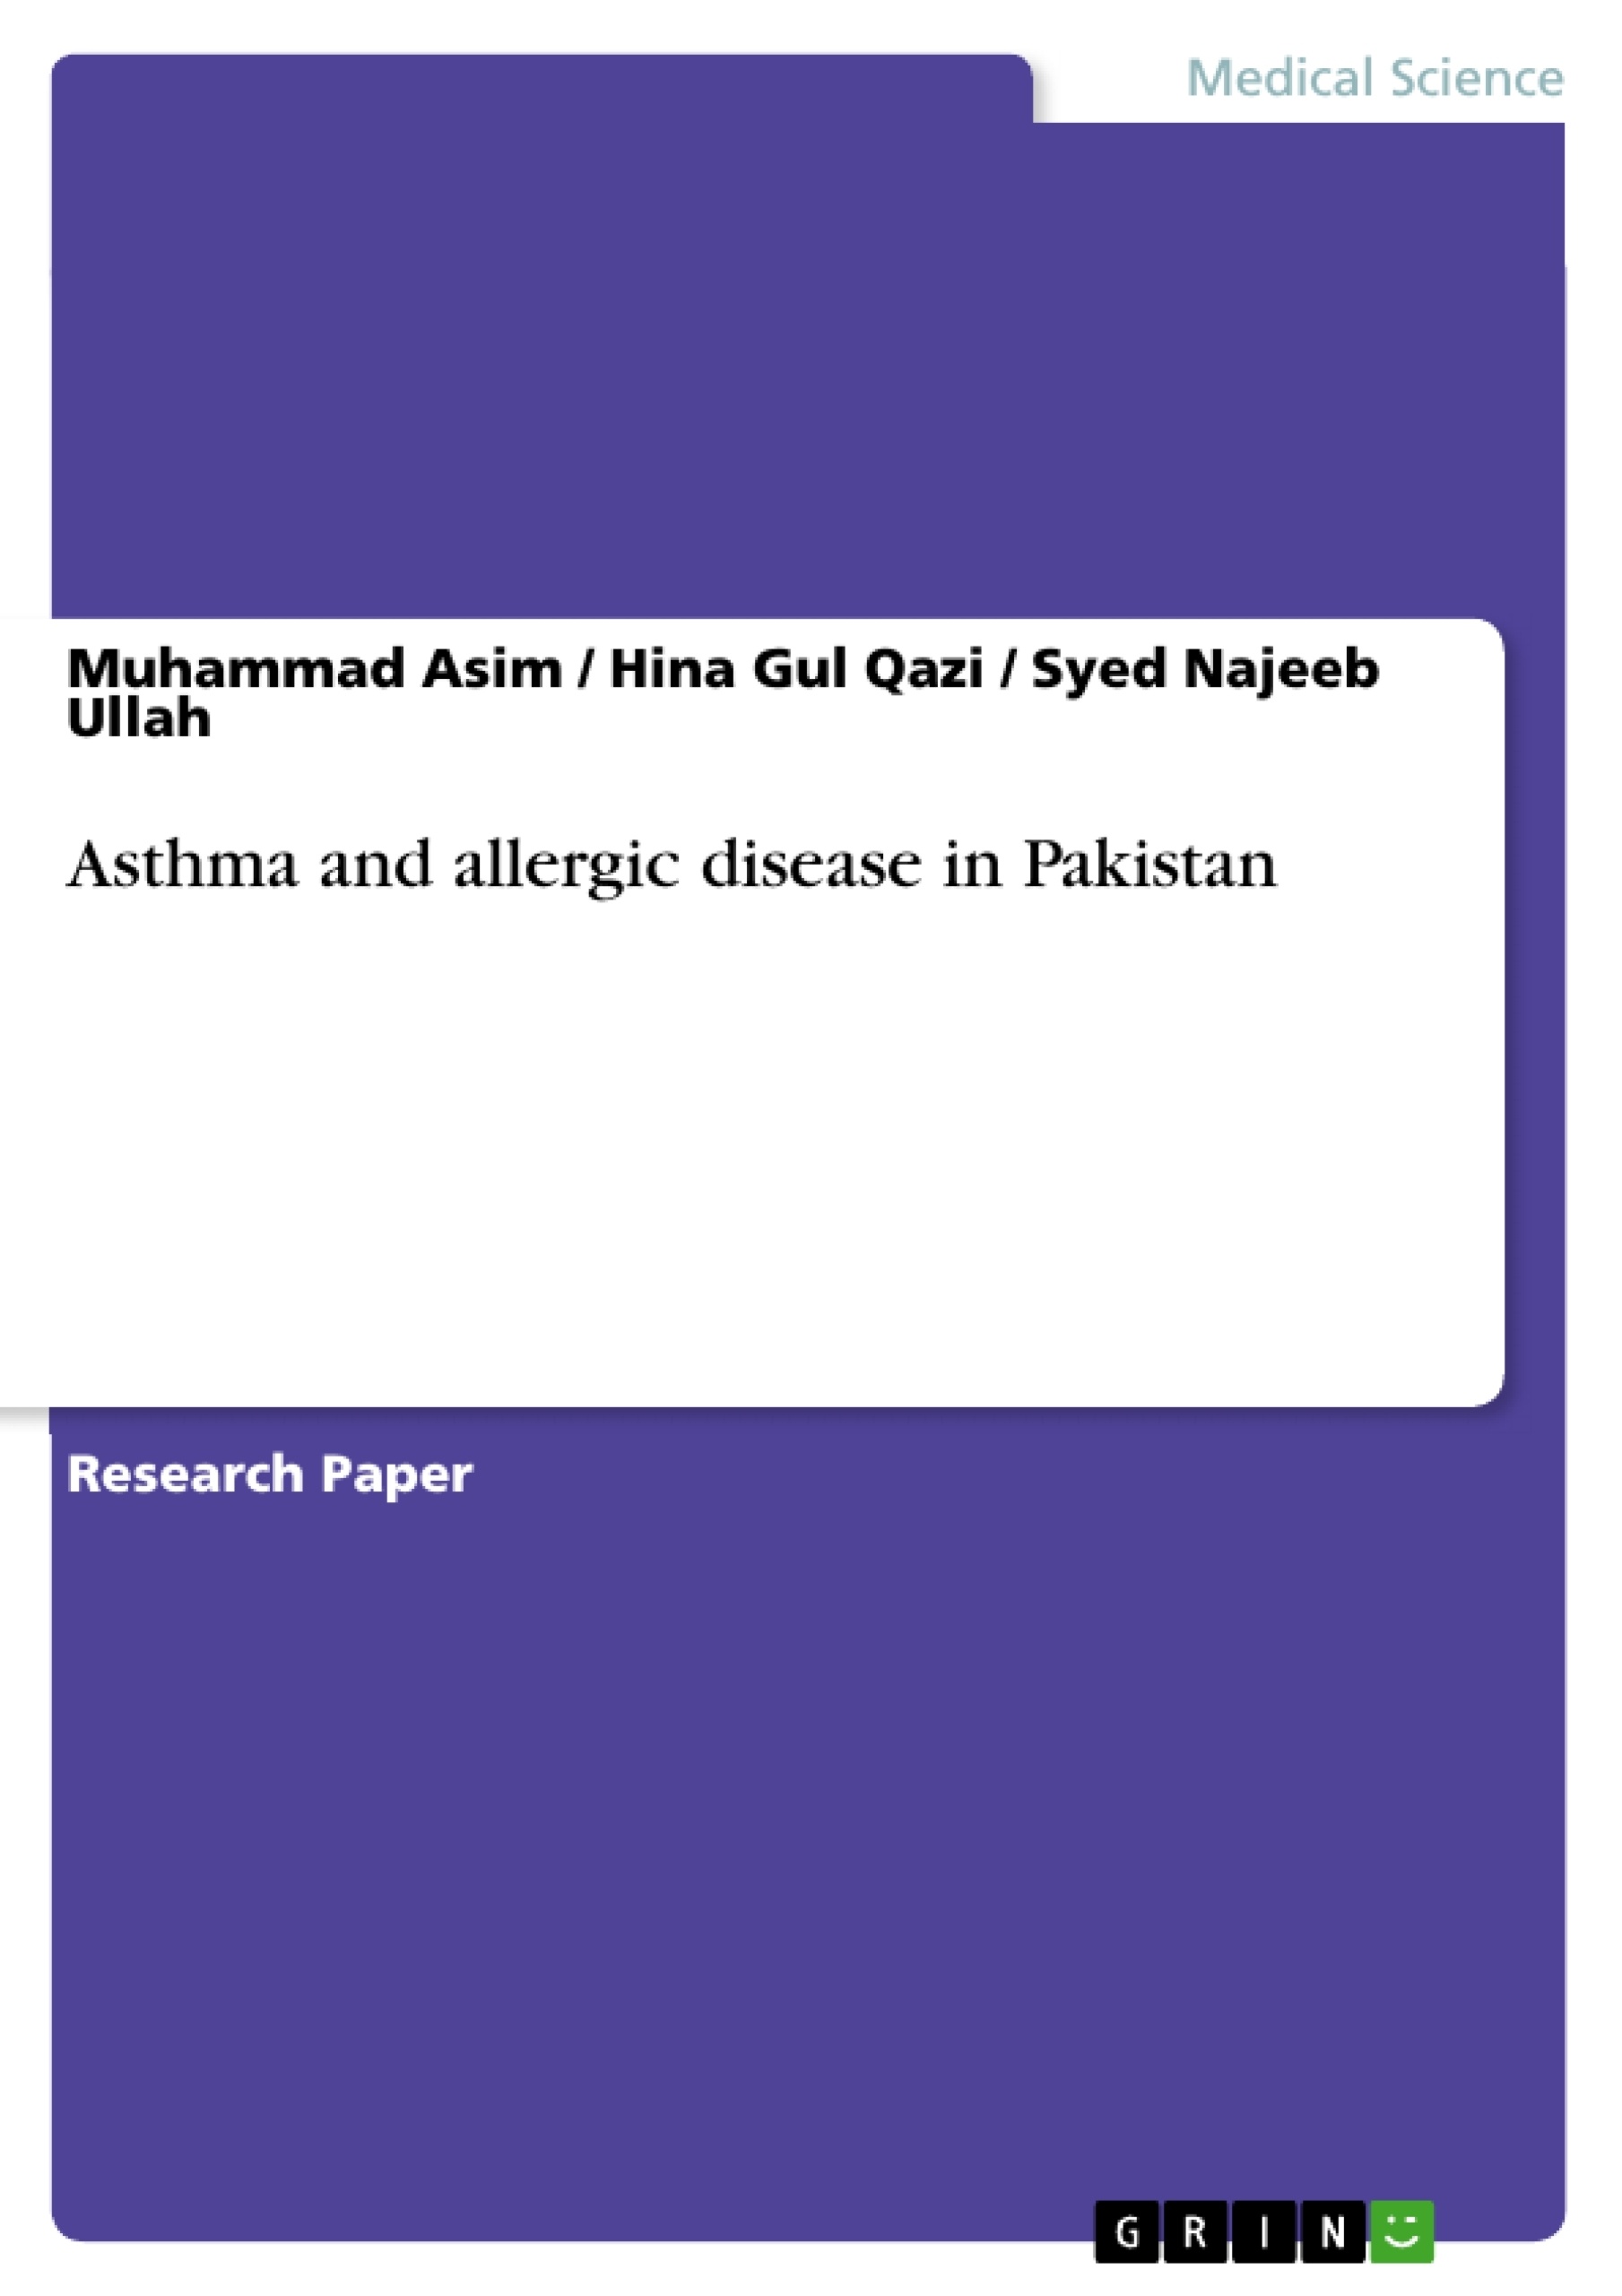 Title: Asthma and allergic disease in Pakistan